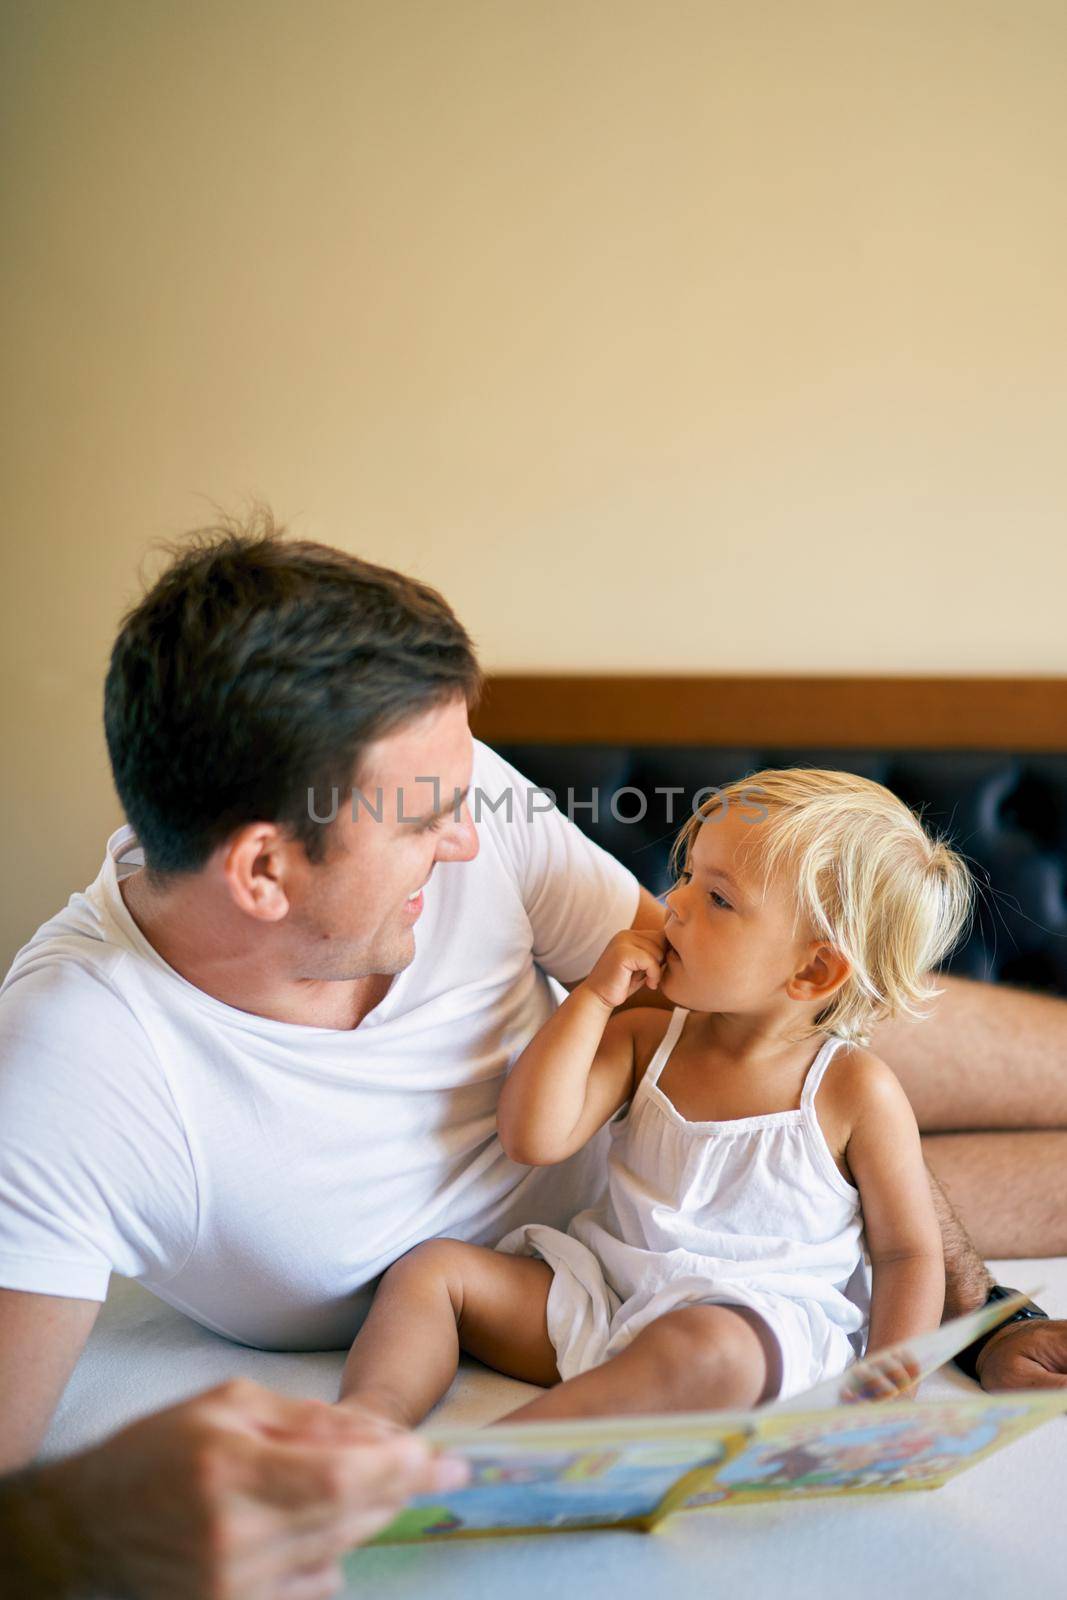 Smiling dad reading colorful book to little girl. High quality photo